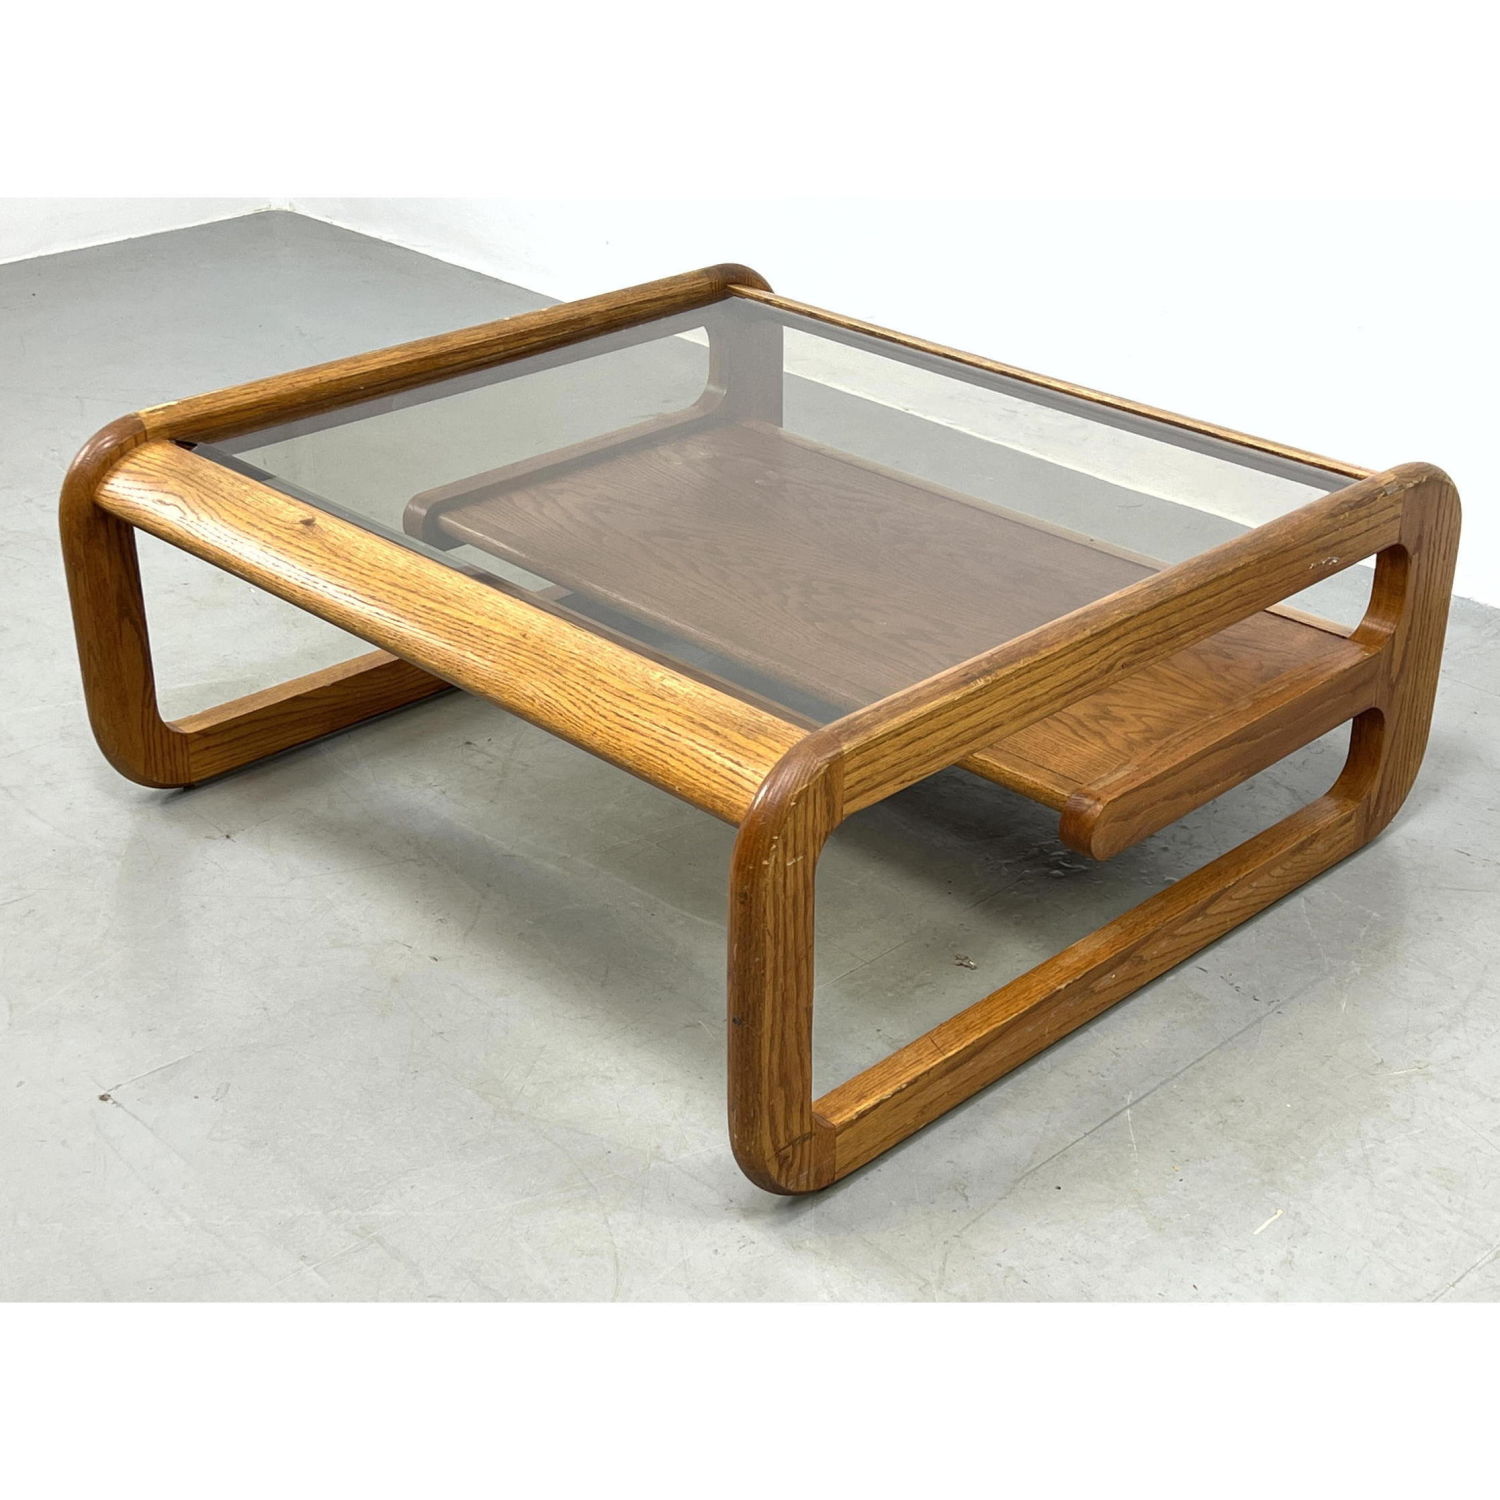 LOU HODGES Oak Coffee table with